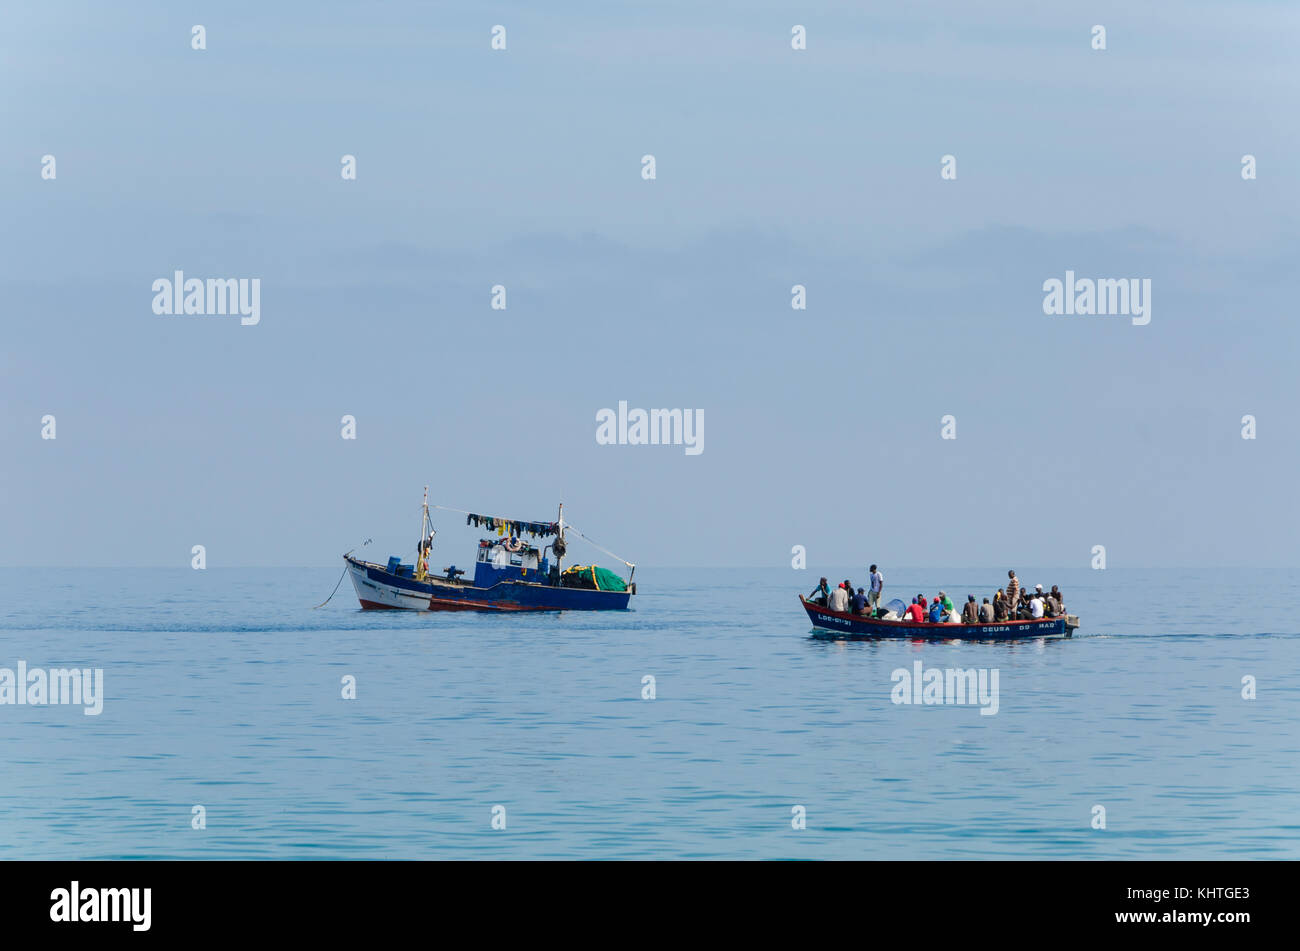 LUCIRA, ANGOLA - MAY 17 2014: Small blue painted fishing boat and smaller boat with many people on Atlantic ocean Stock Photo